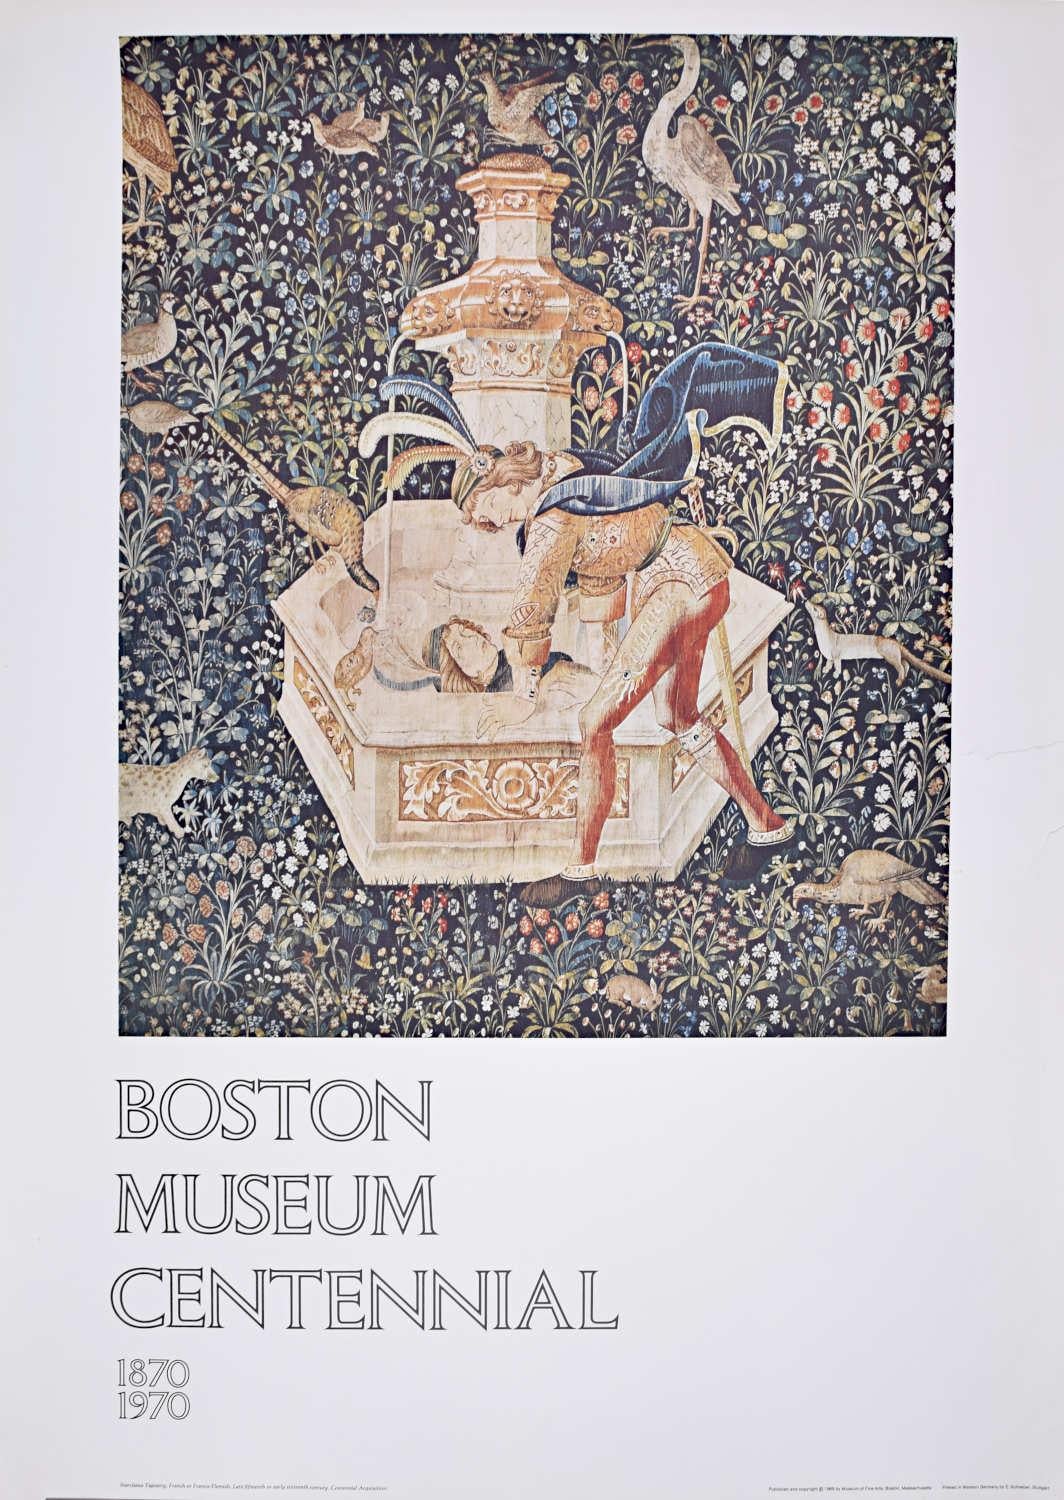 Boston Museum Centennial poster 1970 Narcissus Tapestry 15th century French